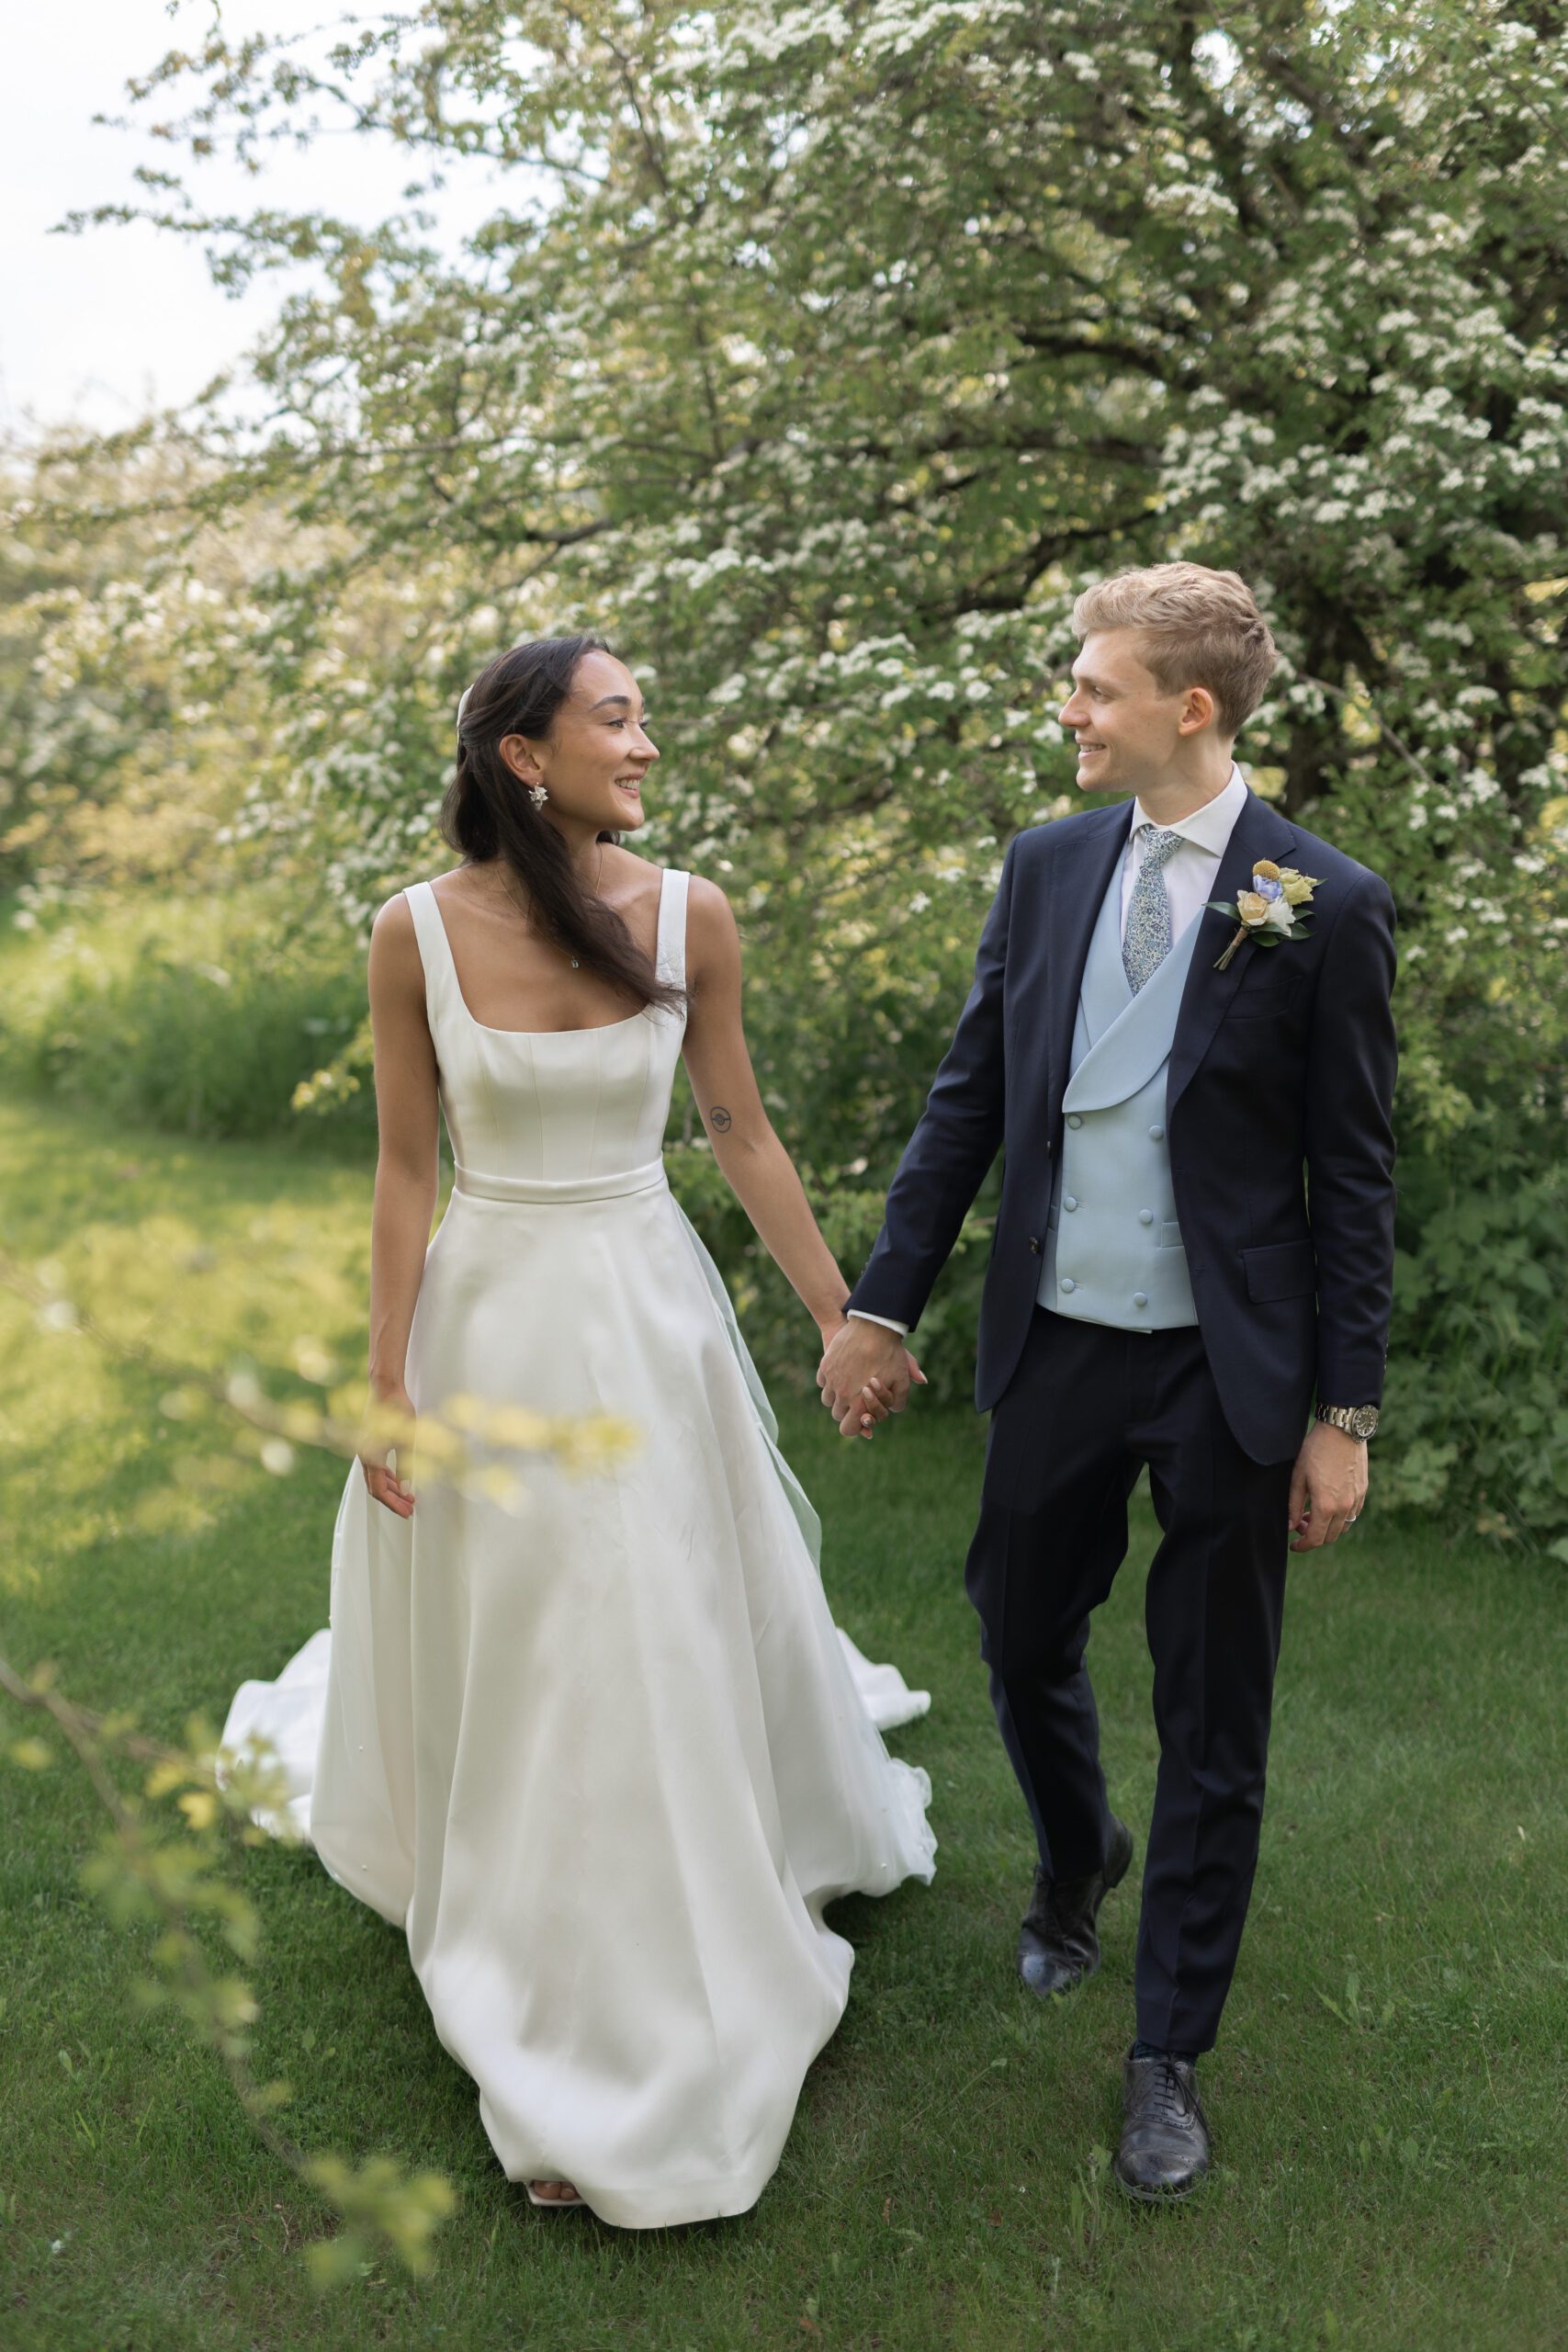 Nastasha and Harry's spring wedding at Old Gore by Yard Space